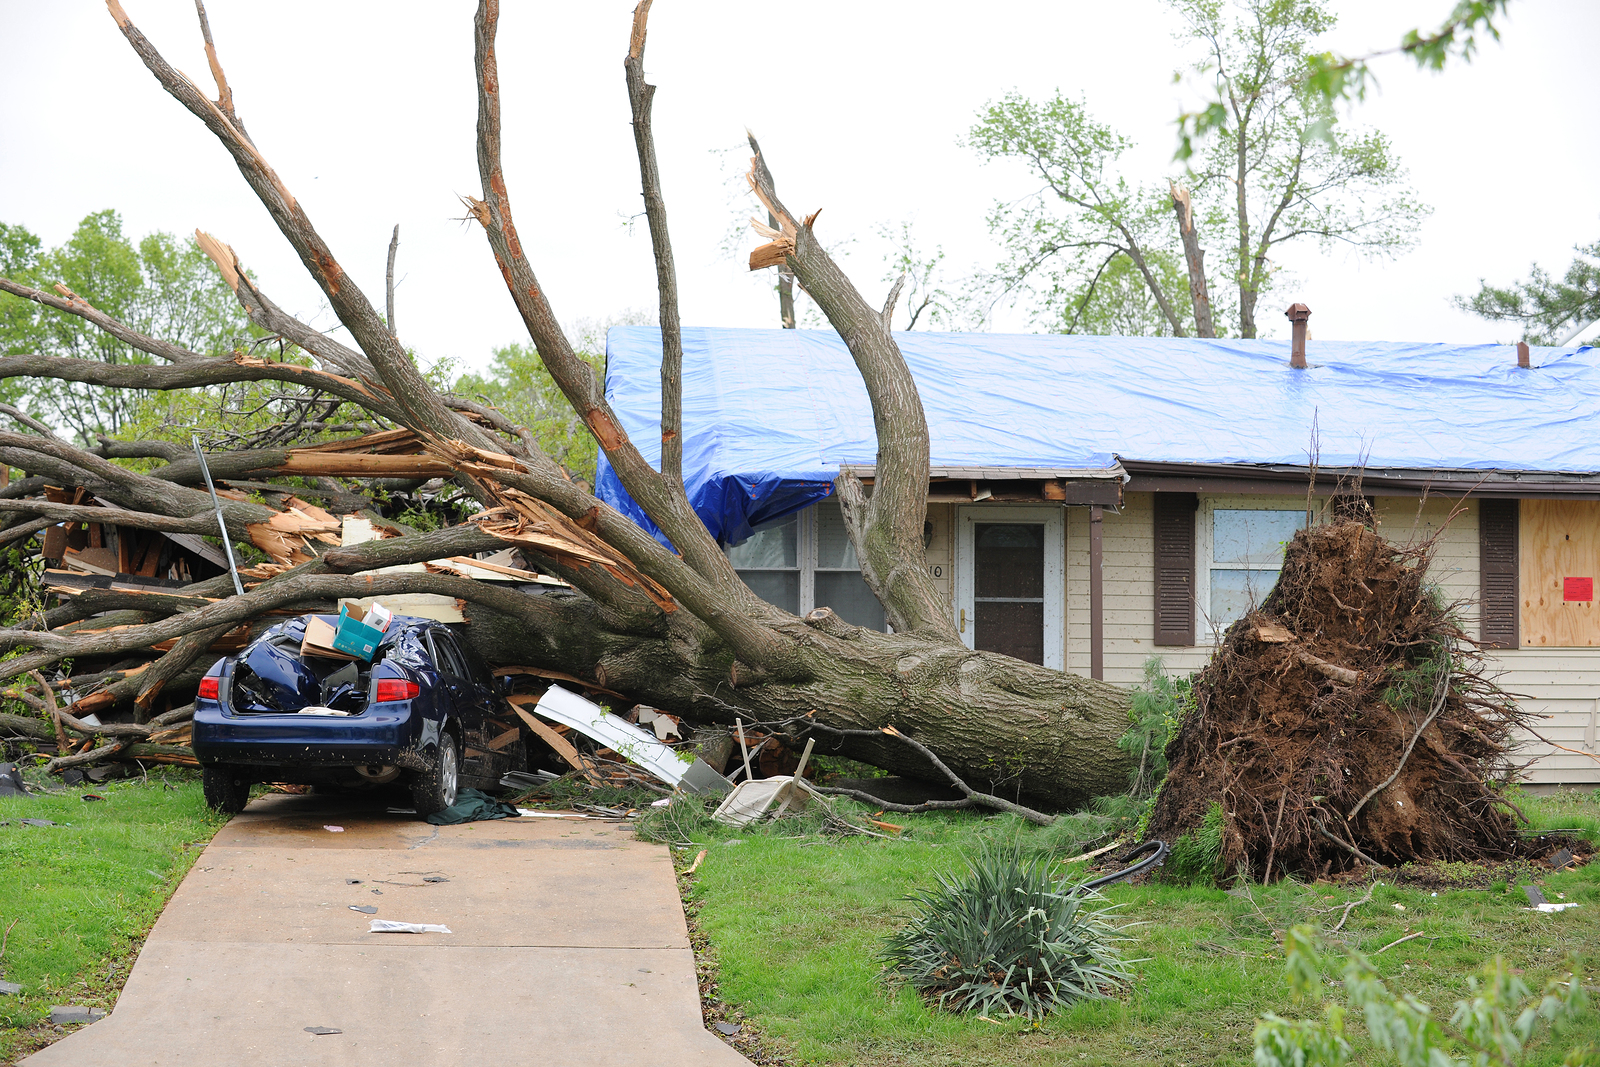 3 checks you need to do to protect your home before a storm